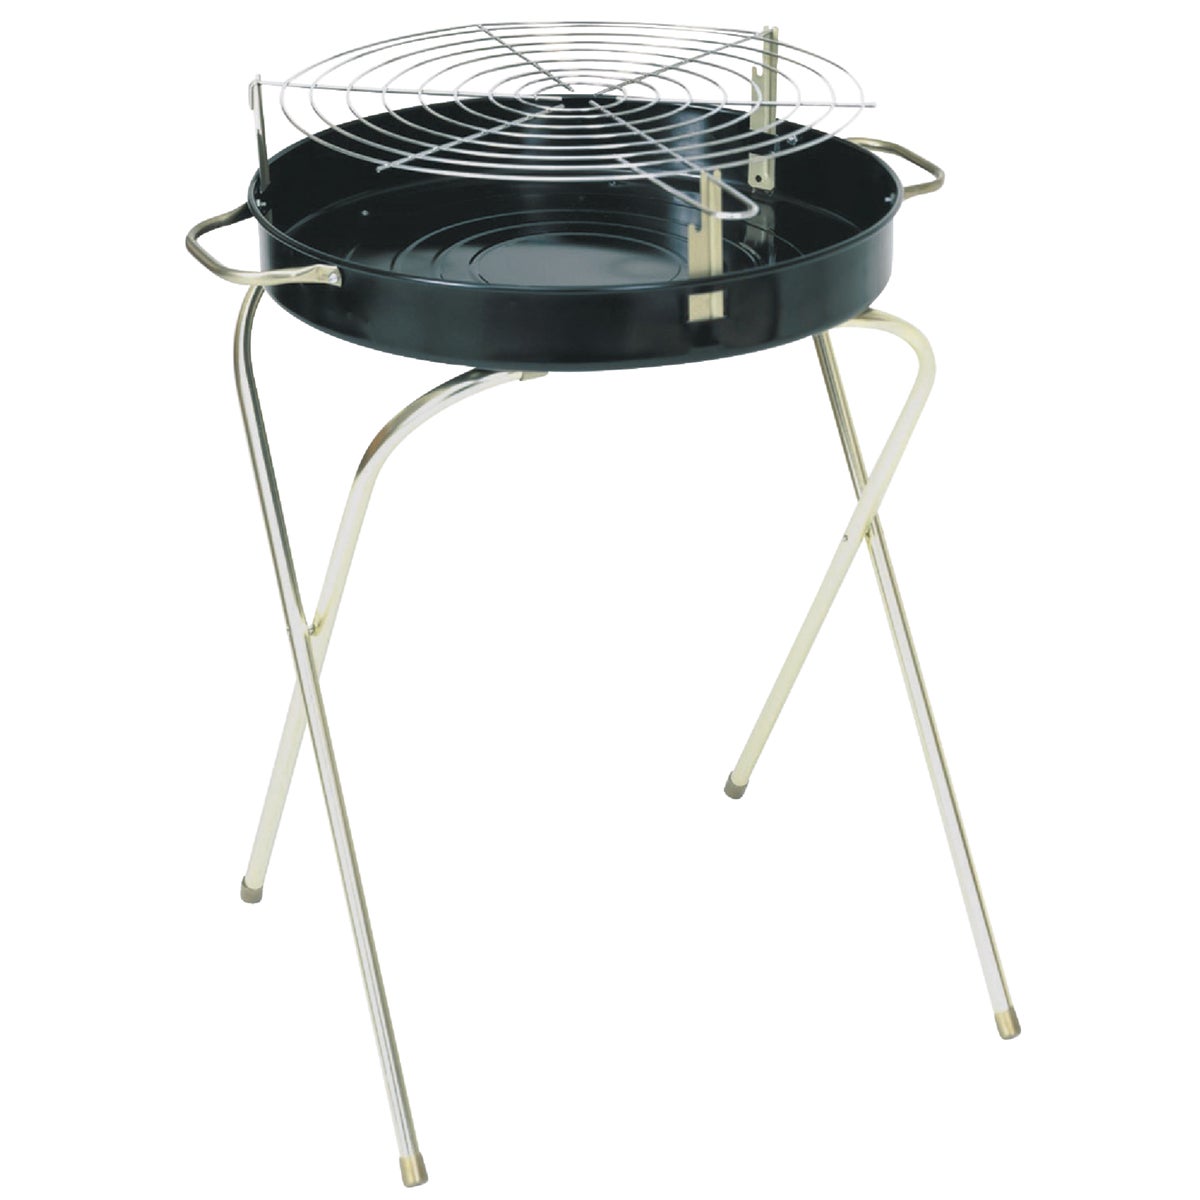 Item 804936, Heavy-duty stamped steel construction. 3-position adjustable cooking grid.